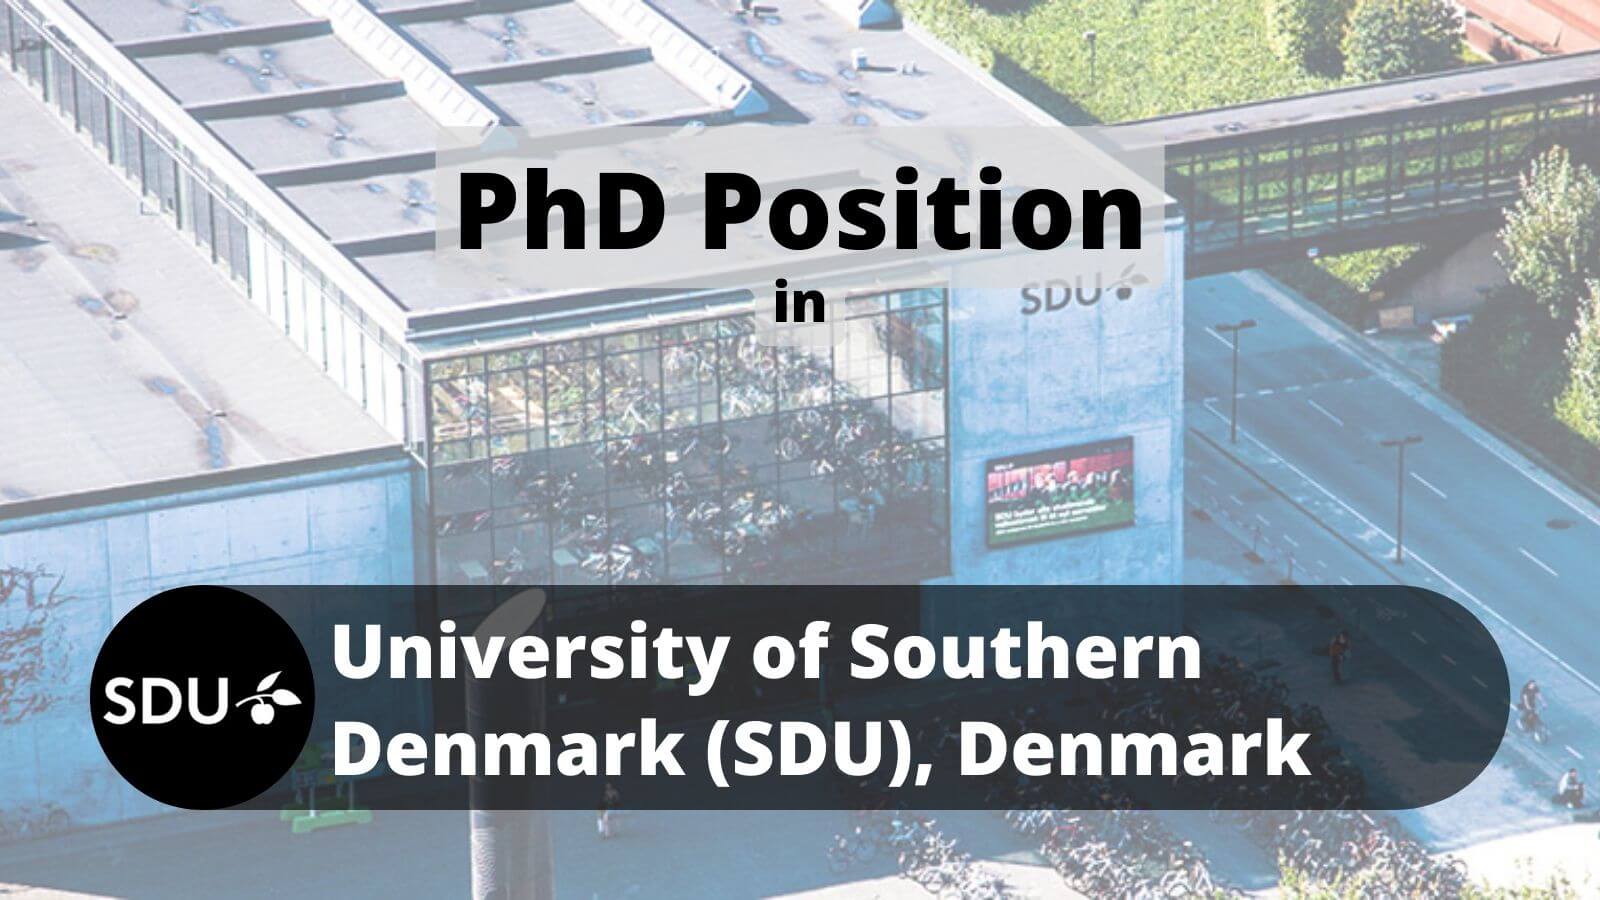 PhD Positions, Vacancies, Jobs in SDU University of Southern Denmark